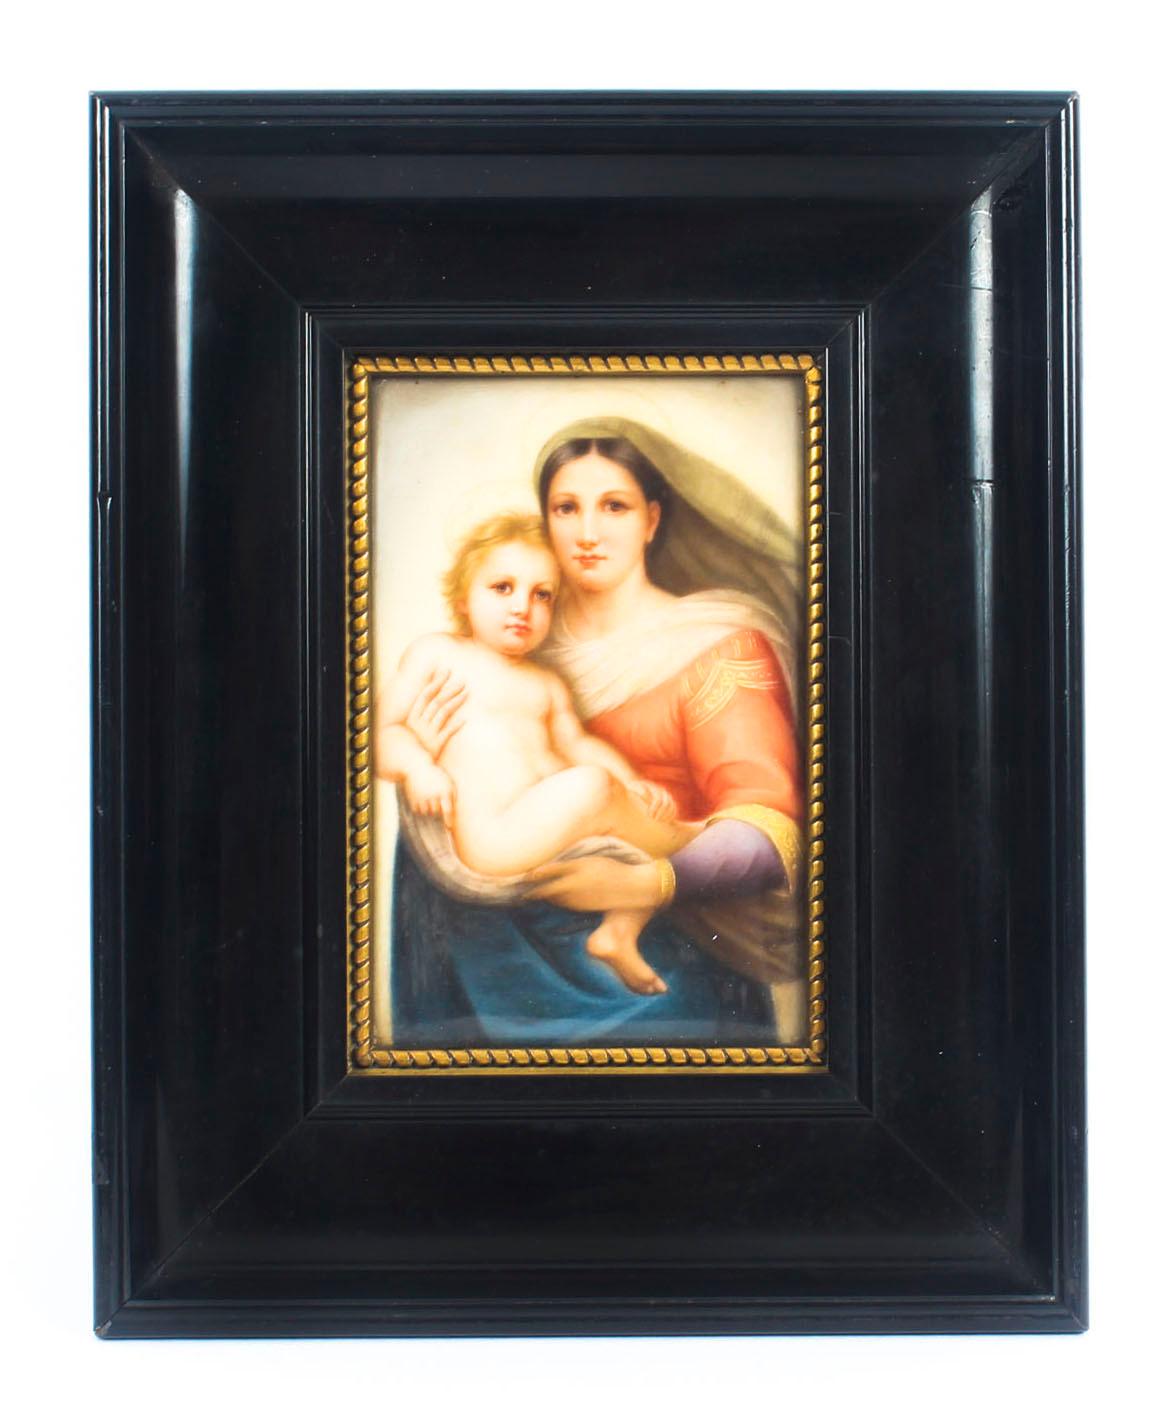 This is a finely painted pair of beautiful KPM Berlin plaques by Raphael Santi and J. Hofman and, circa 1885 in date

One plaque depicts the Sistine Madonna and Child and the other Jesus in the garden of Gethsemane, each titled on the reverse and